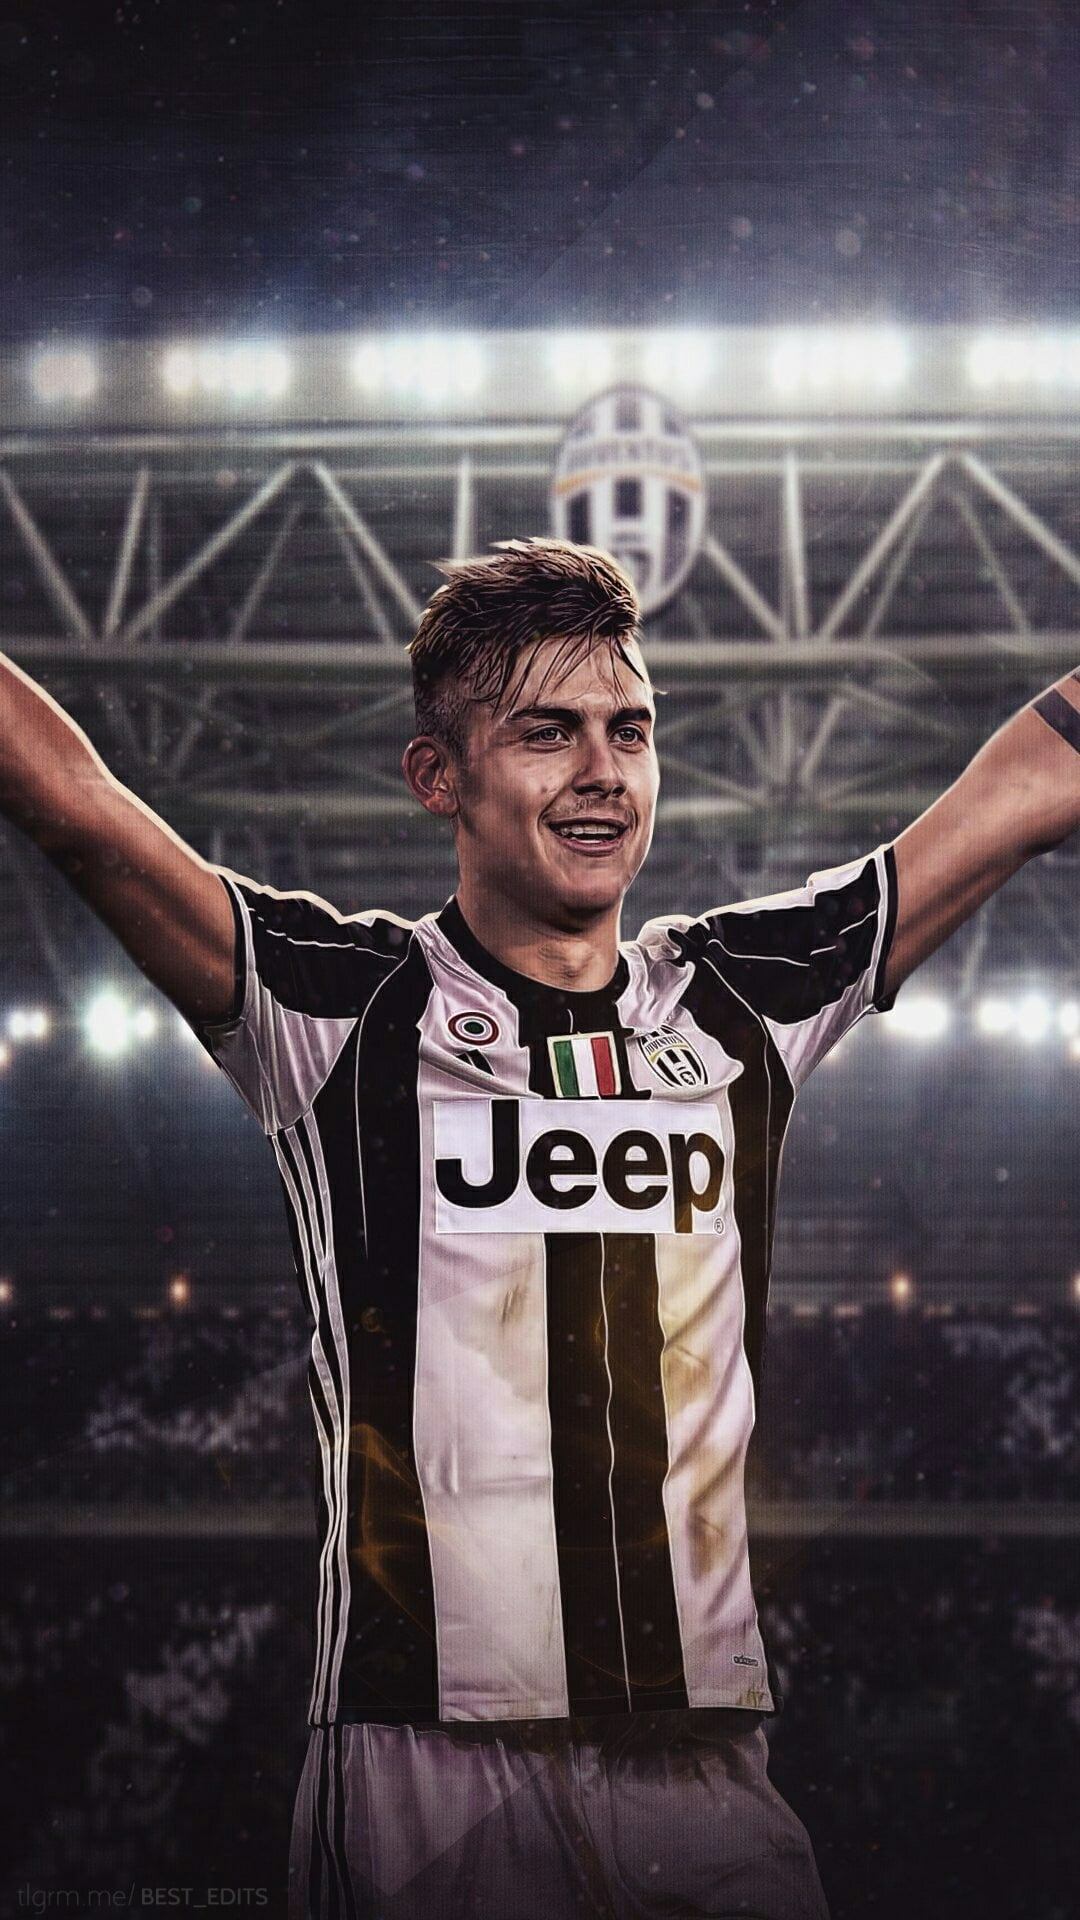 Paulo Dybala wallpaper, soccer pitches, white and black Adidas Jeep soccer jersey